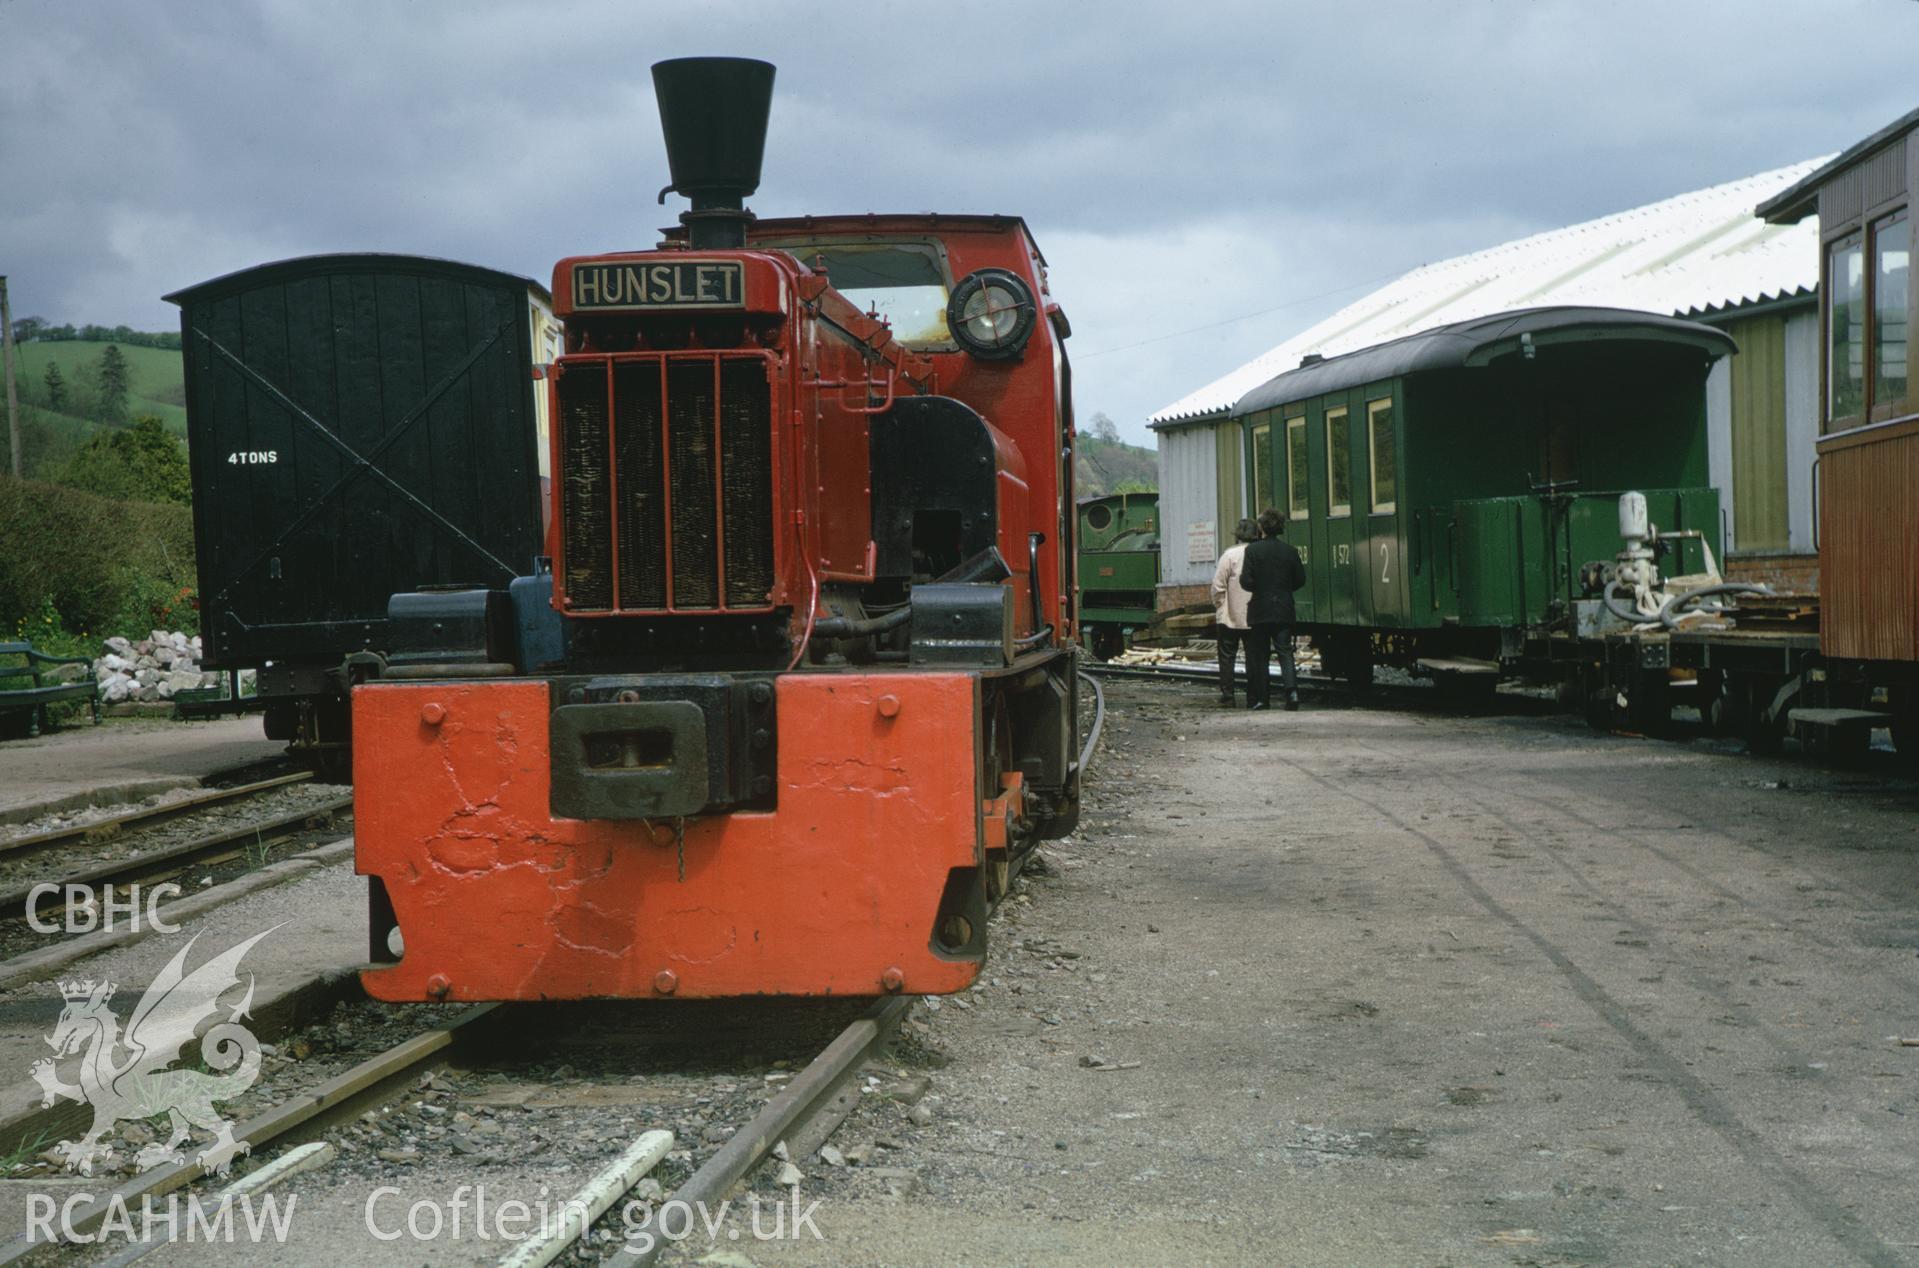 35mm colour slide showing Hunslet at Llanfair Caereinion Station, by Dylan Roberts.